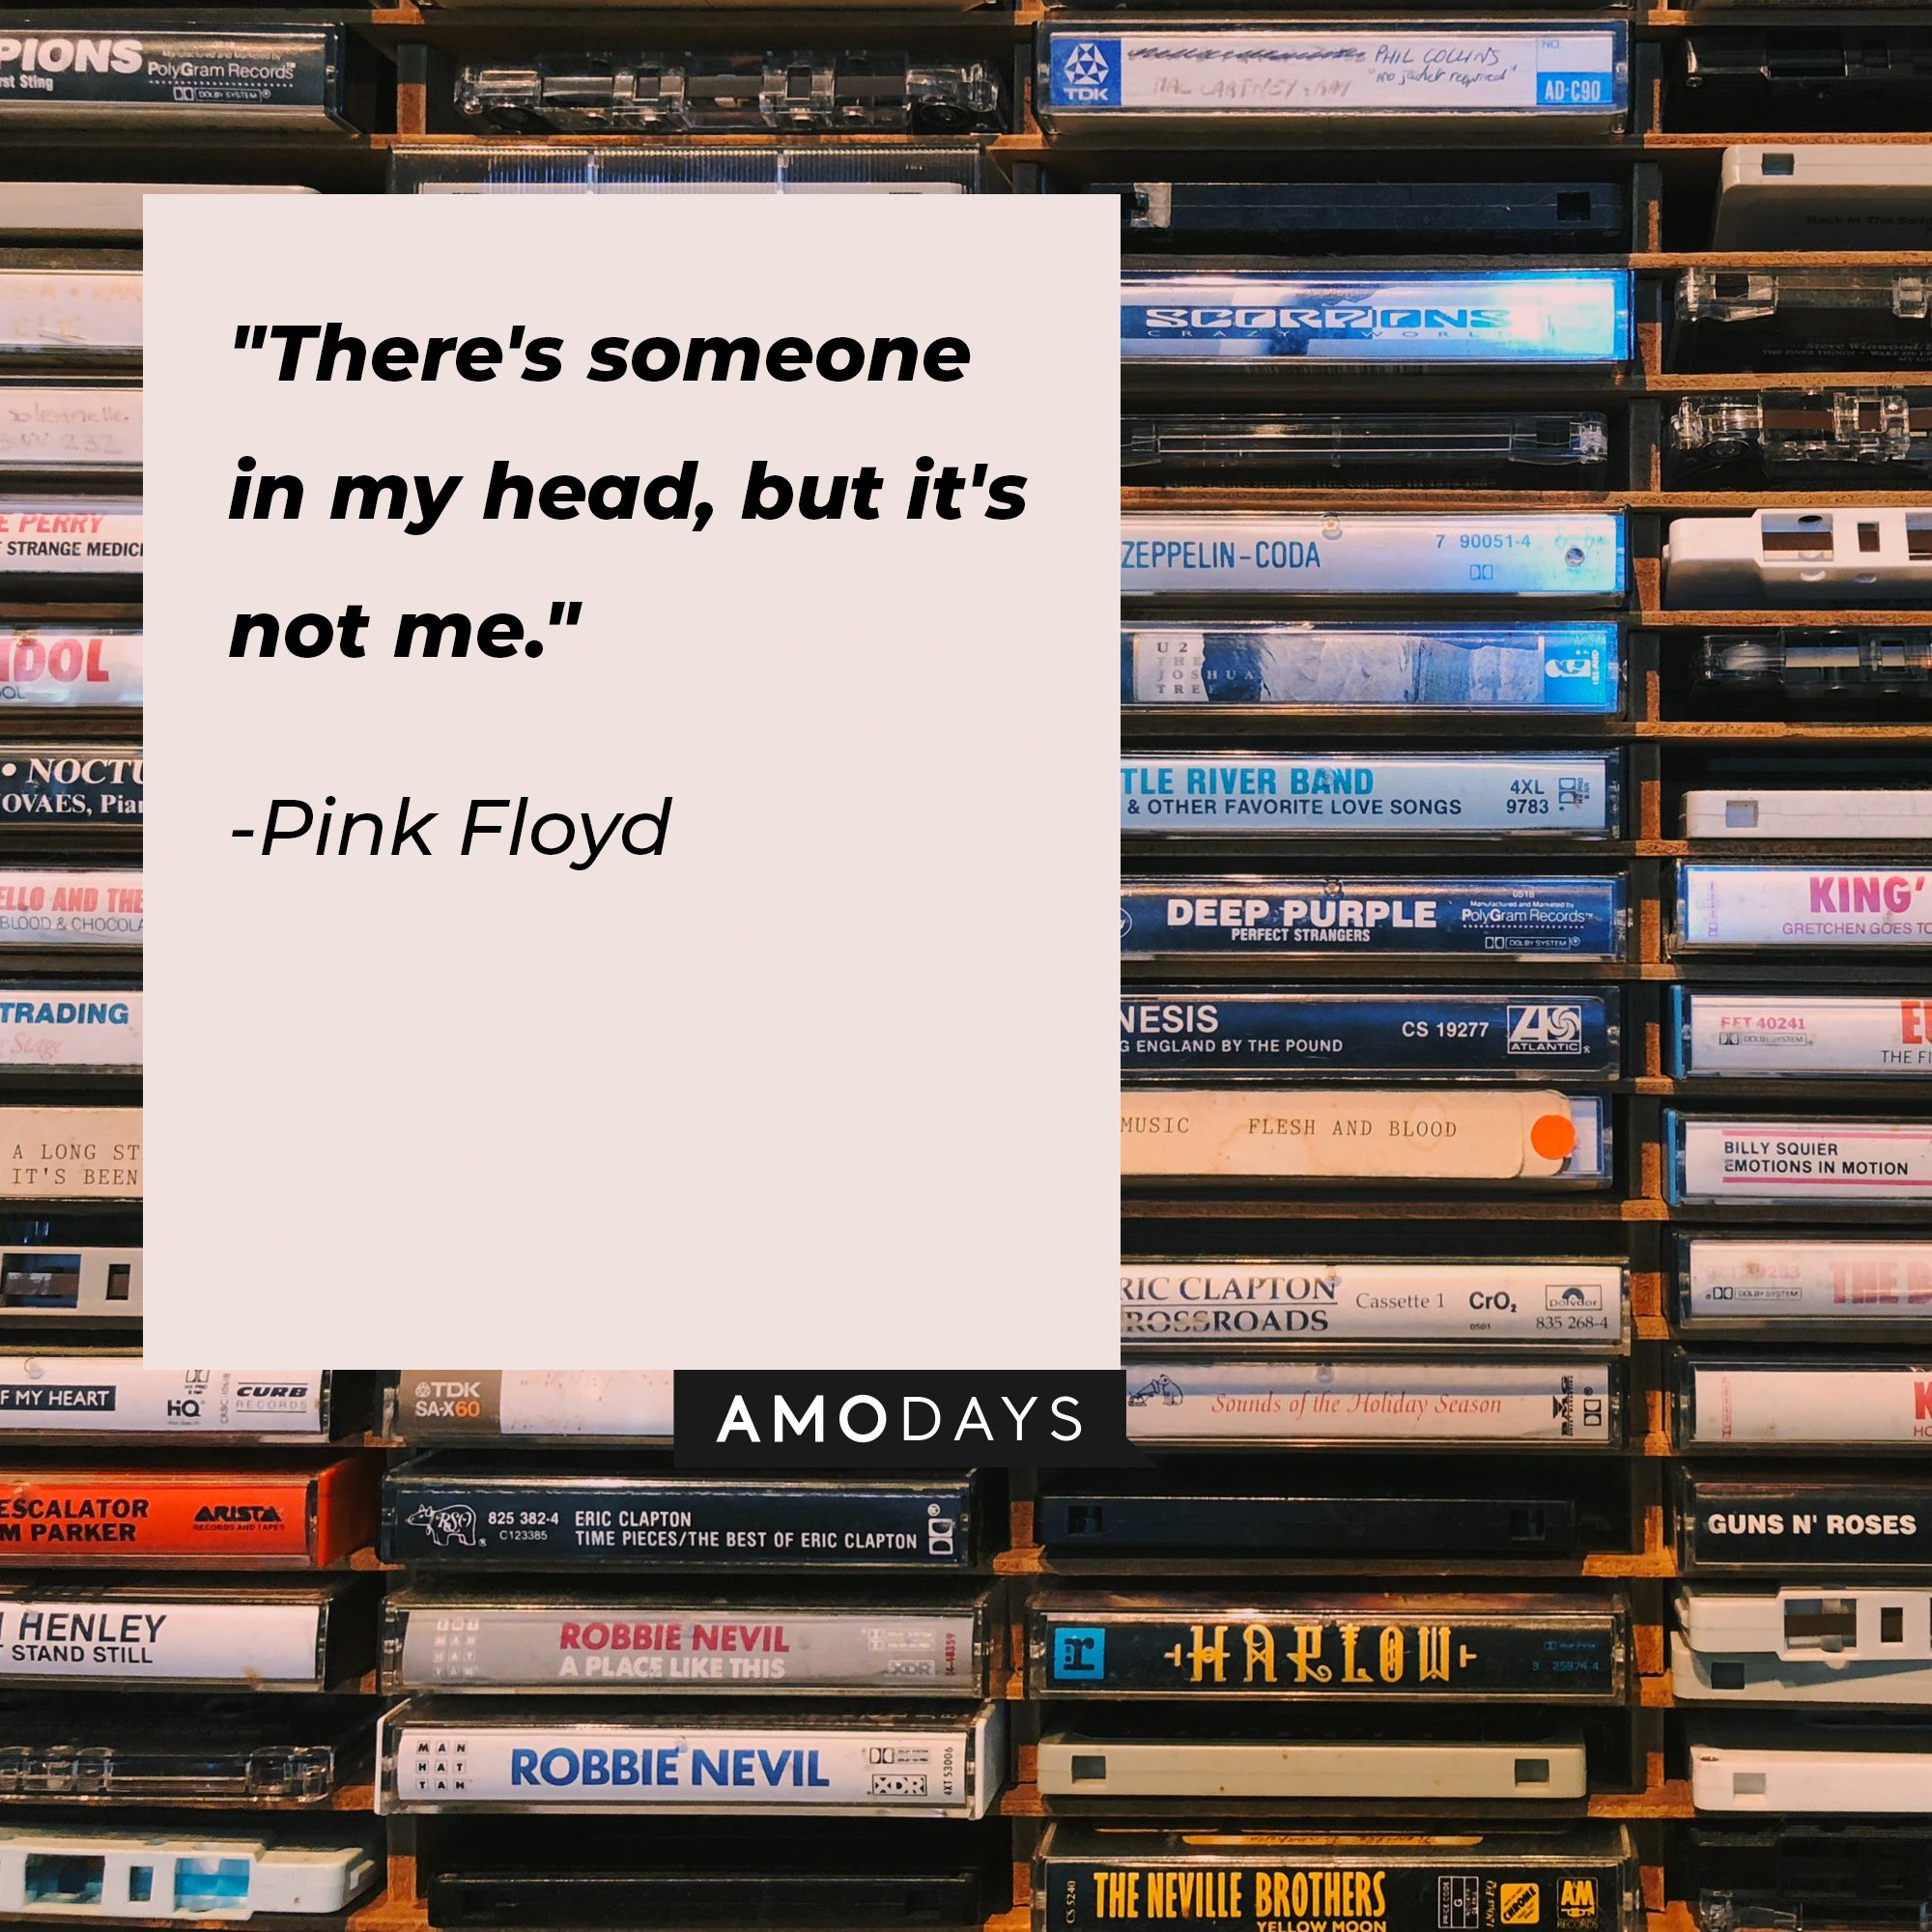 Pink Floyd's quote: "There's someone in my head, but it's not me." | Image: AmoDays